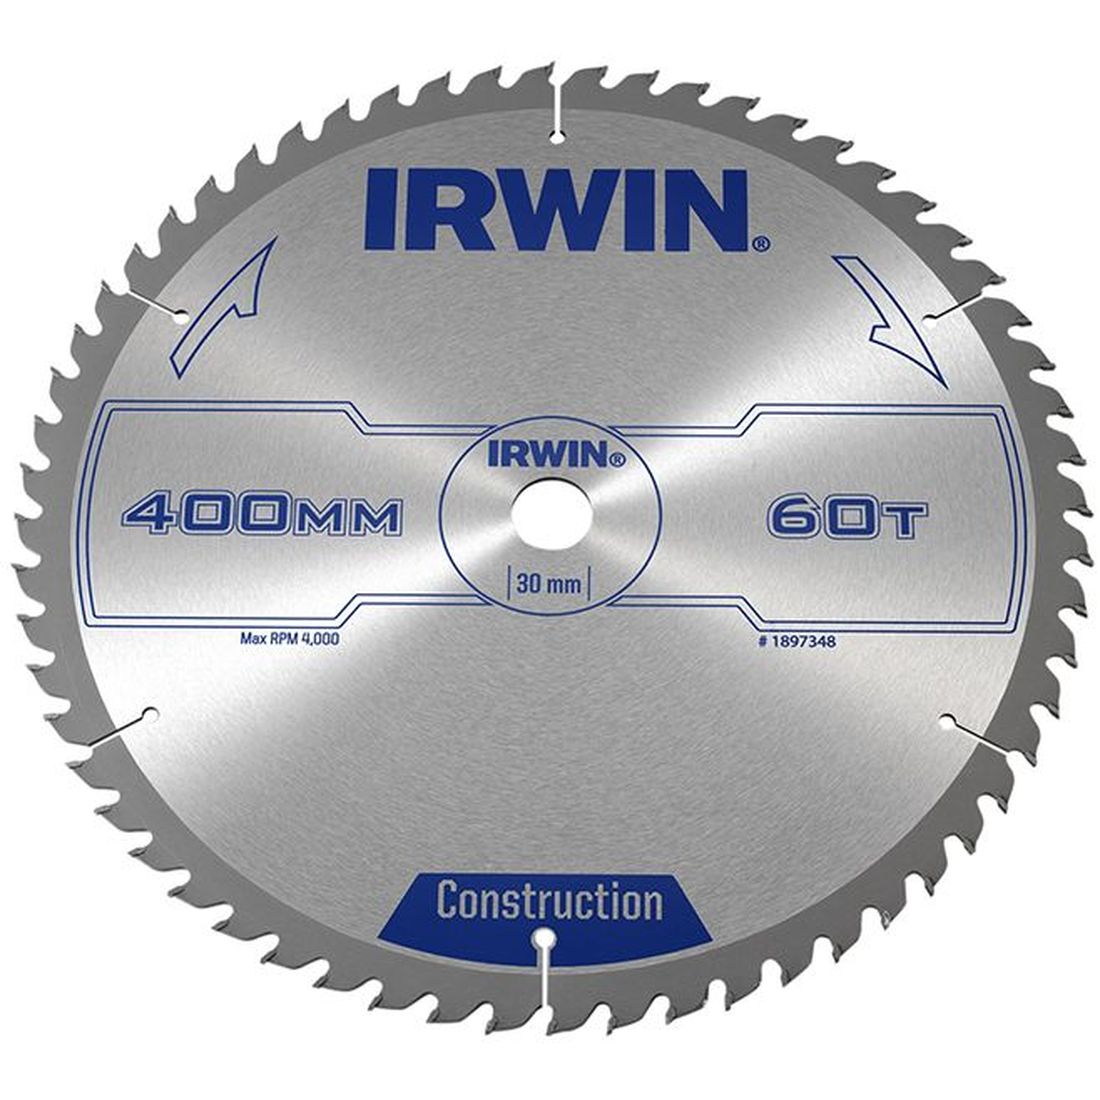 IRWIN General Purpose Table & Mitre Saw Blade 400 x 30mm x 60T ATB                    